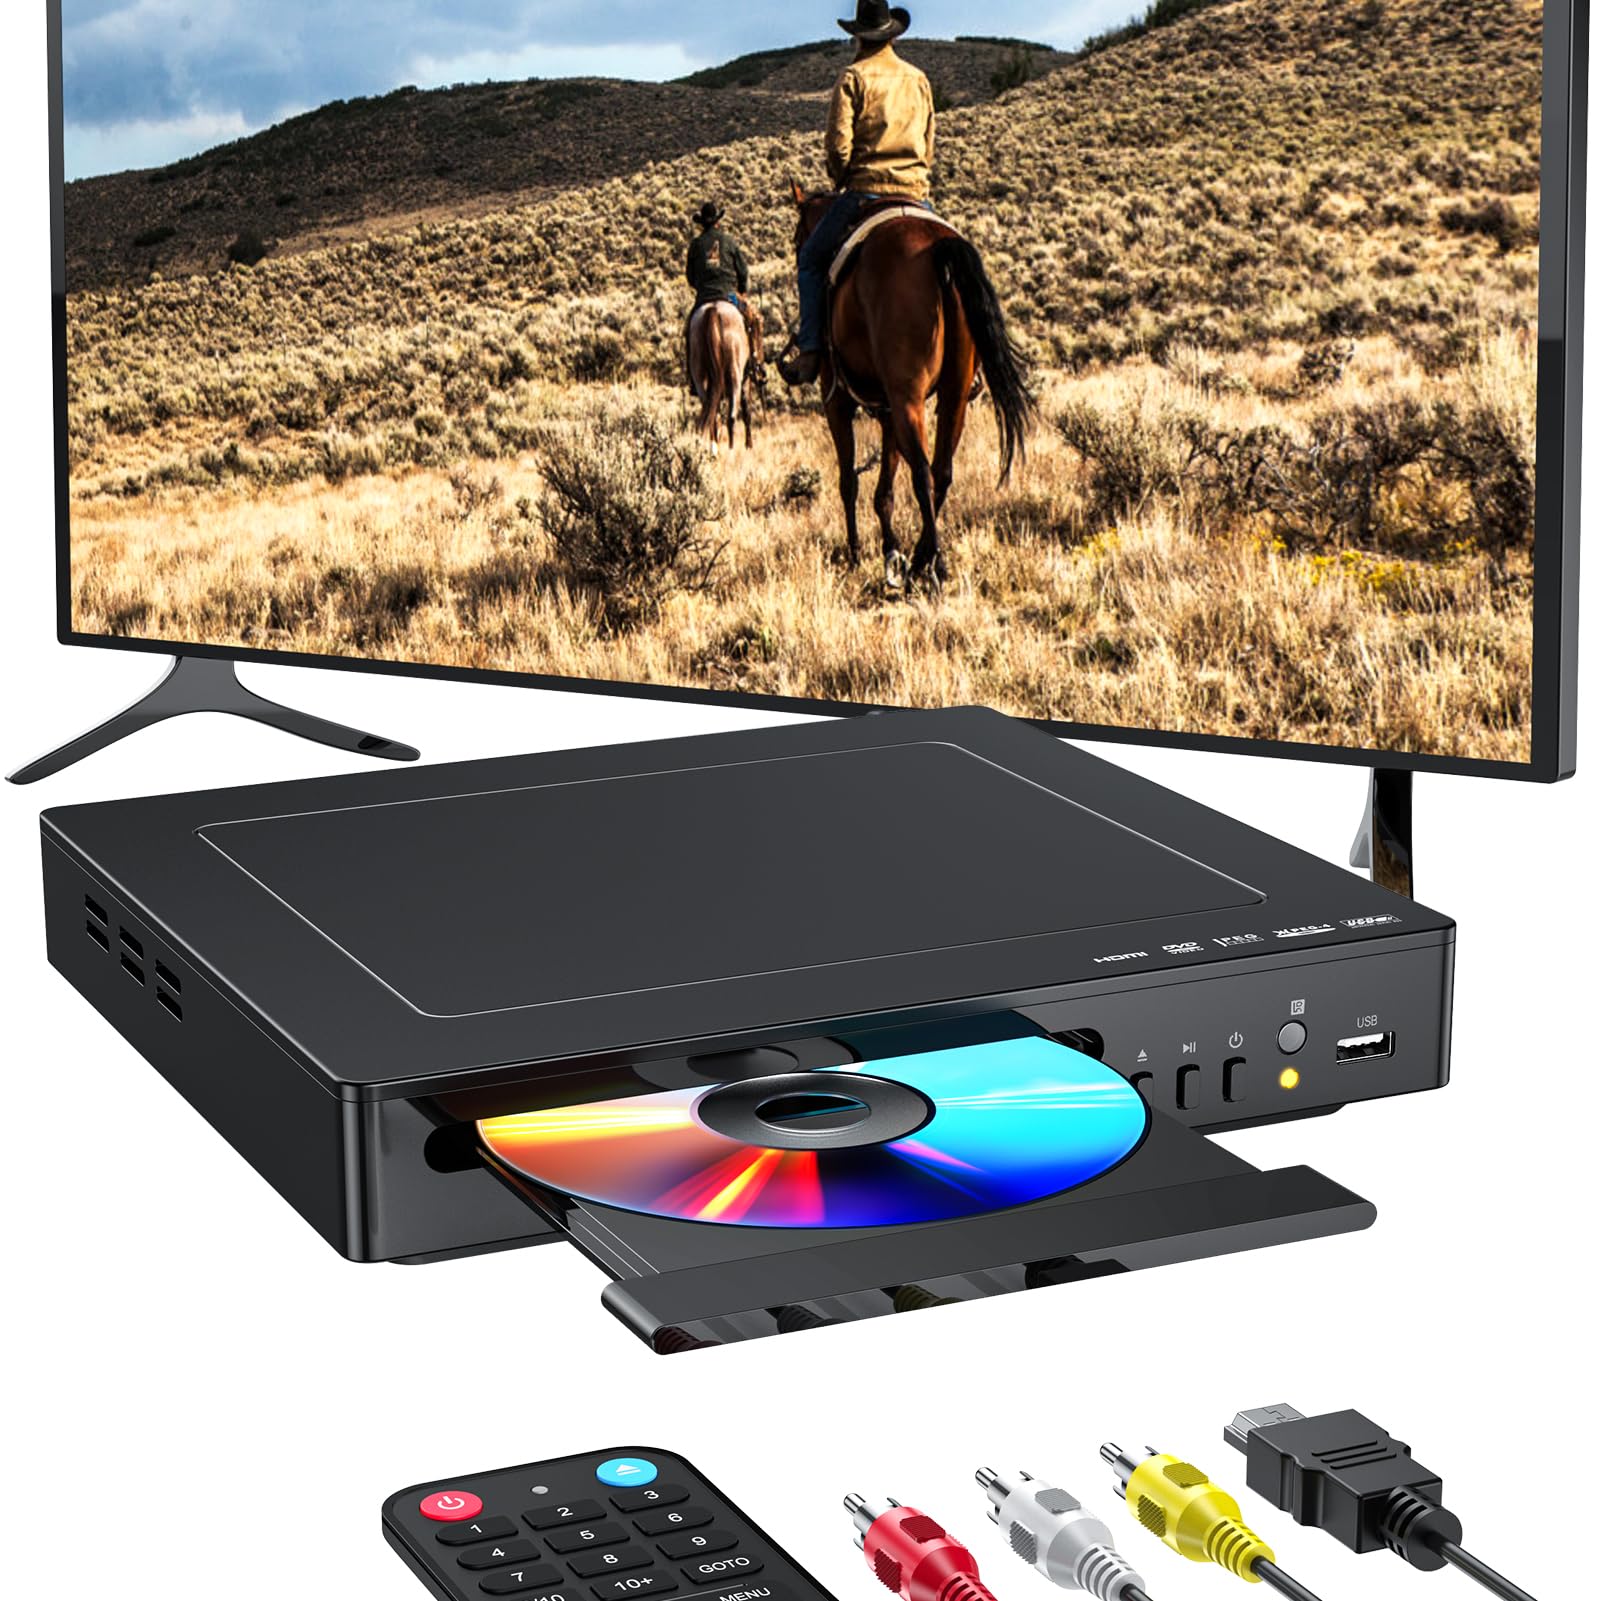 ELECTCOM PRO DVD Players for Smart TV with HDMI, Simple DVD Player for Elderly, DVD Players That Play All Regions, cD Player for Home Stereo 